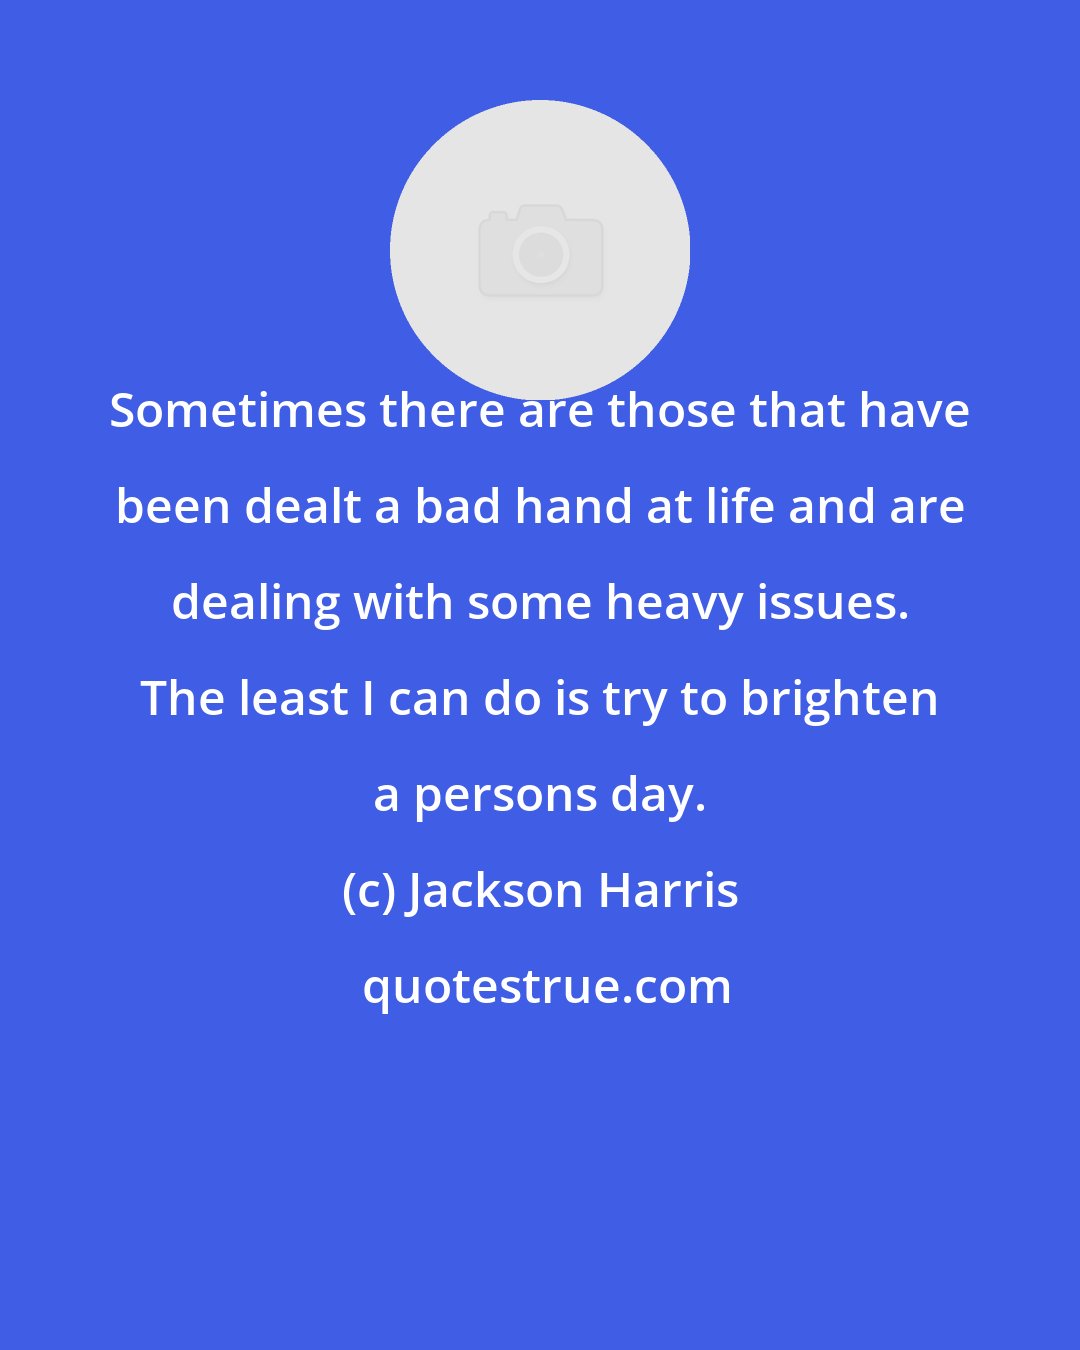 Jackson Harris: Sometimes there are those that have been dealt a bad hand at life and are dealing with some heavy issues. The least I can do is try to brighten a persons day.